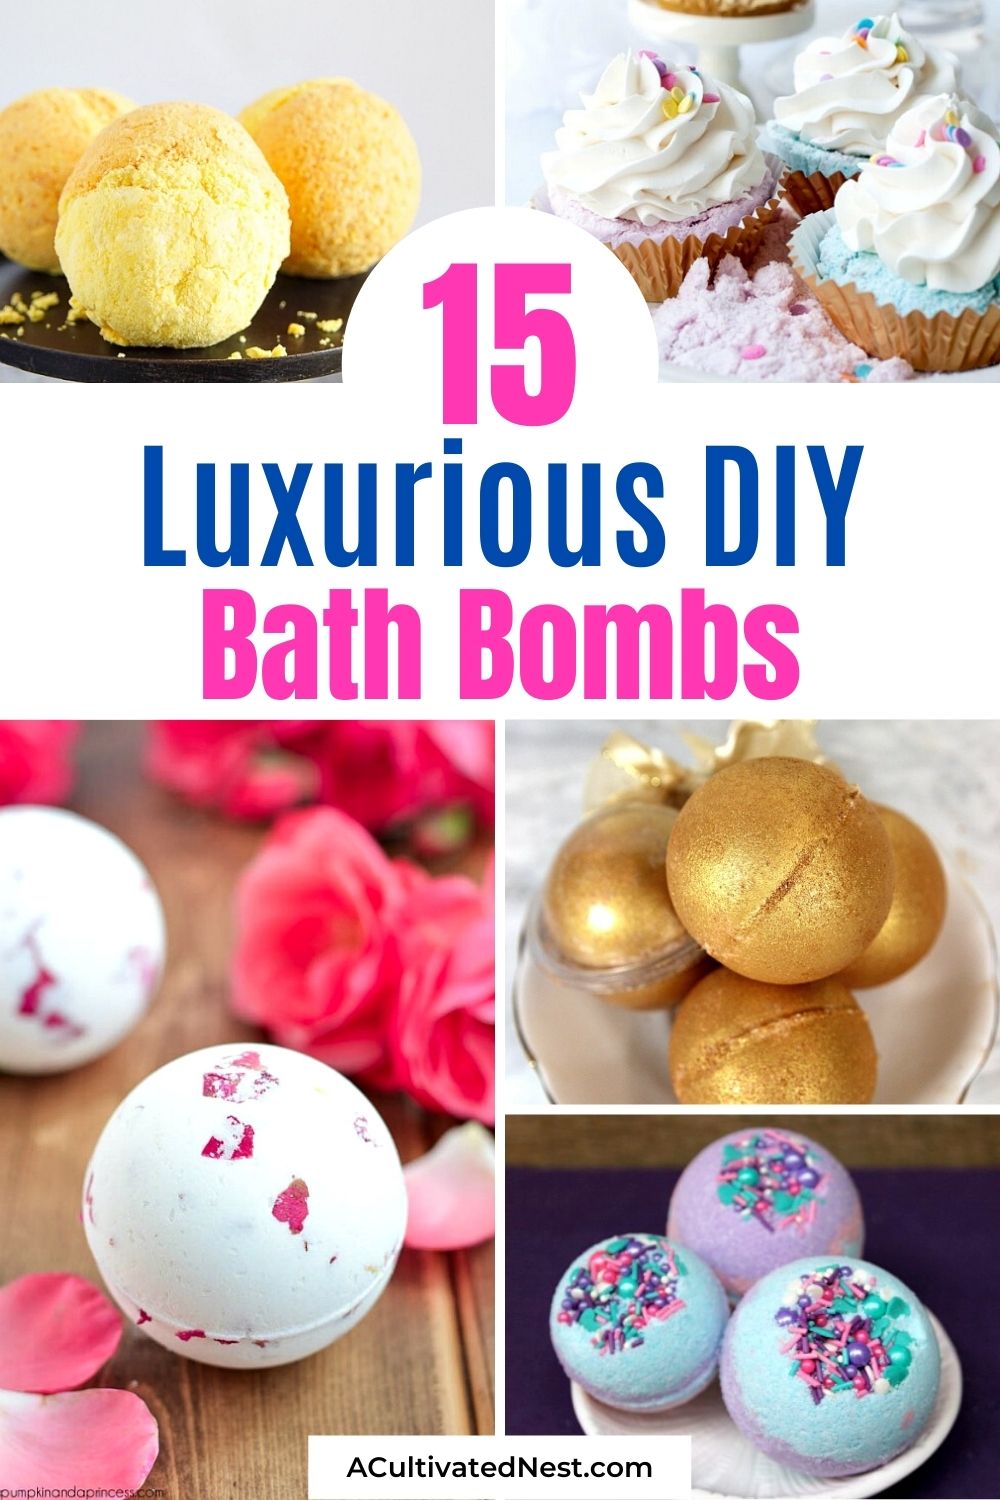 15 Luxurious DIY Bath Bombs- Take a luxurious relaxing bath with one of these homemade bath bombs! These bath bombs are easy to make, and also make wonderful DIY gifts! | homemade beauty products, DIY gift ideas, spa, relax, homemade gift ideas, DIY beauty, handmade gift #homemadeGifts #bathBombs #crafting #homemadeBeautyProducts #ACultivatedNest